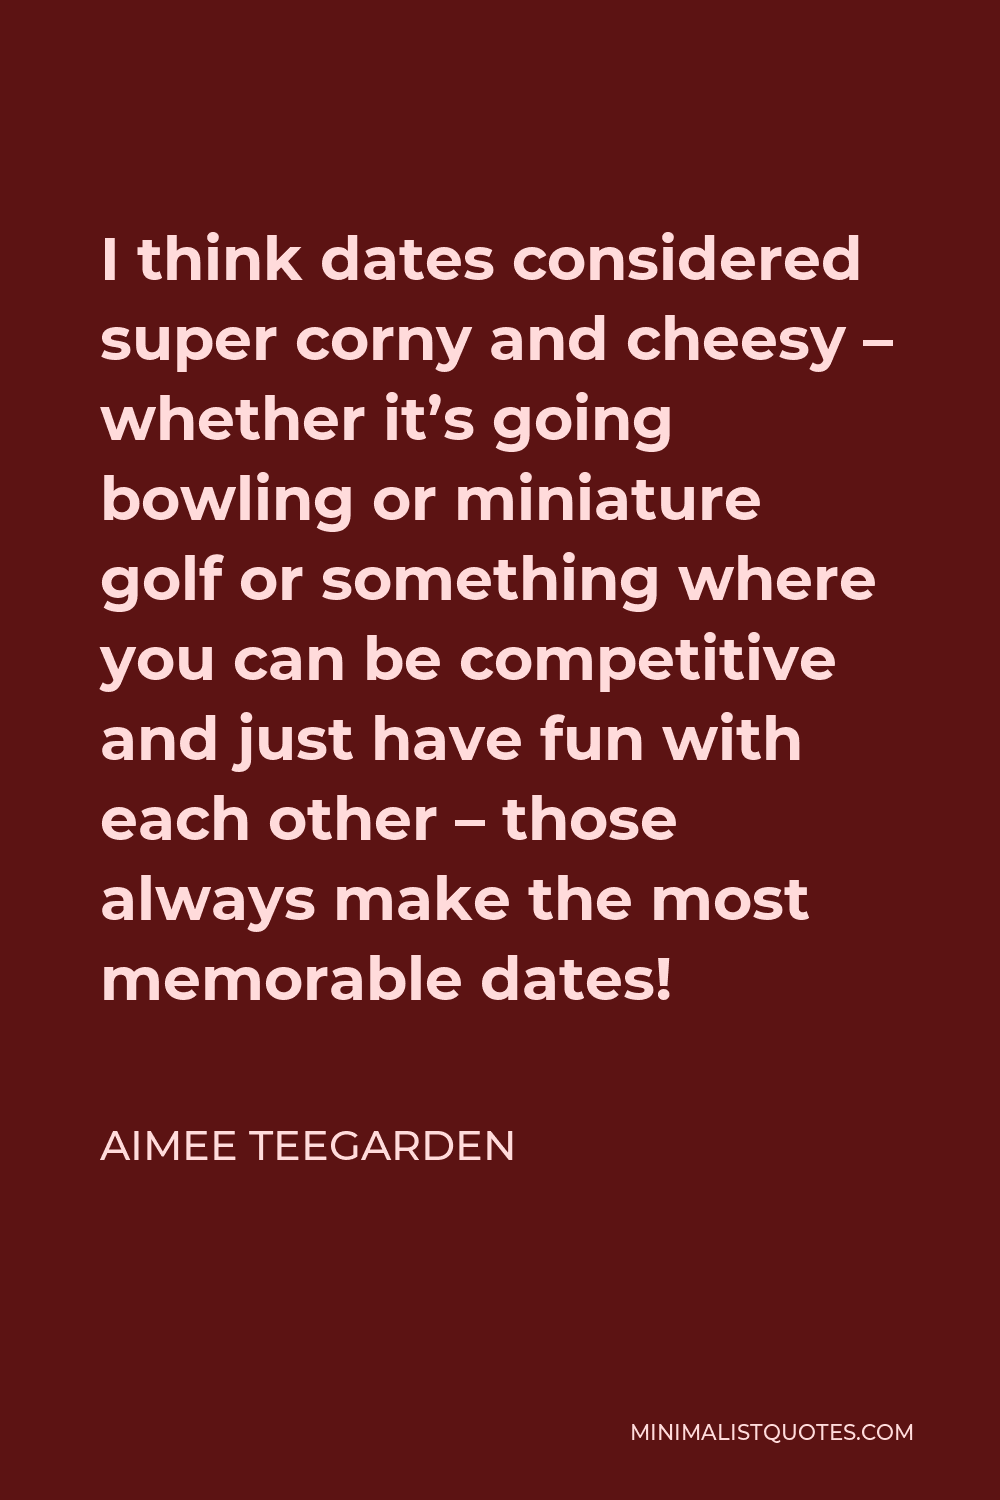 Aimee Teegarden Quote - I think dates considered super corny and cheesy – whether it’s going bowling or miniature golf or something where you can be competitive and just have fun with each other – those always make the most memorable dates!